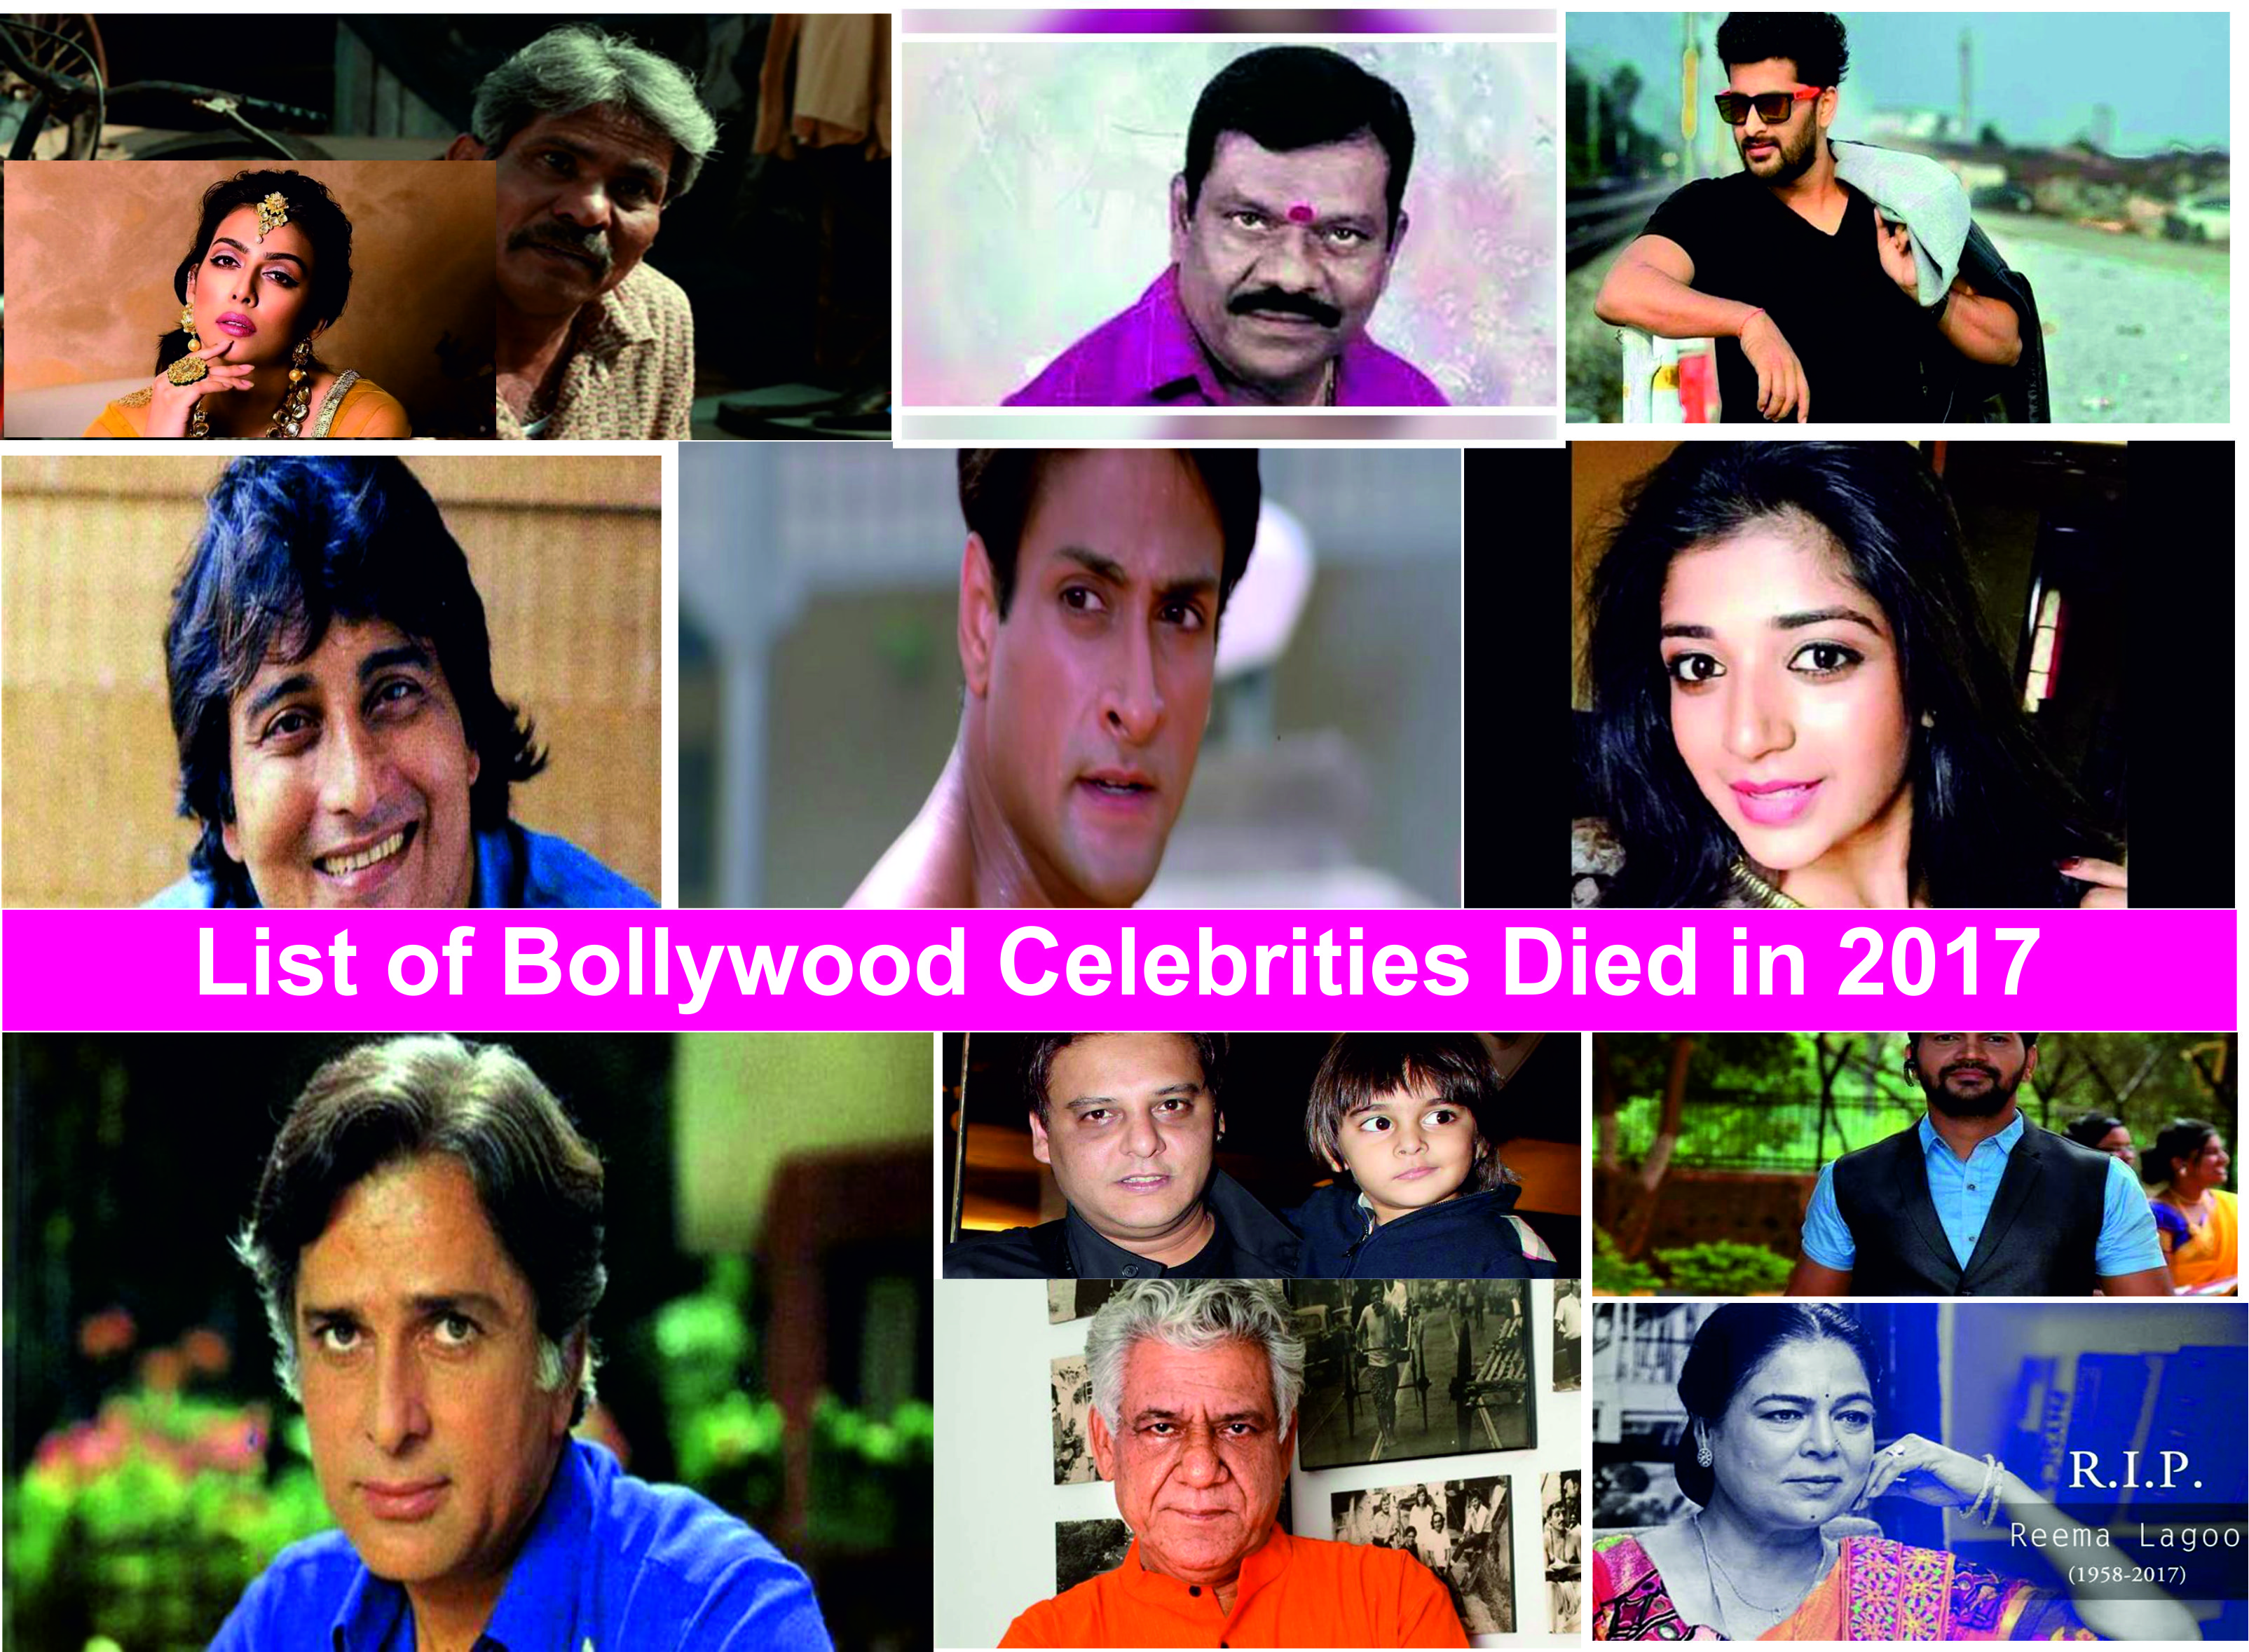 list of famous indian celebrities died in 2017-2018 (updated) - find